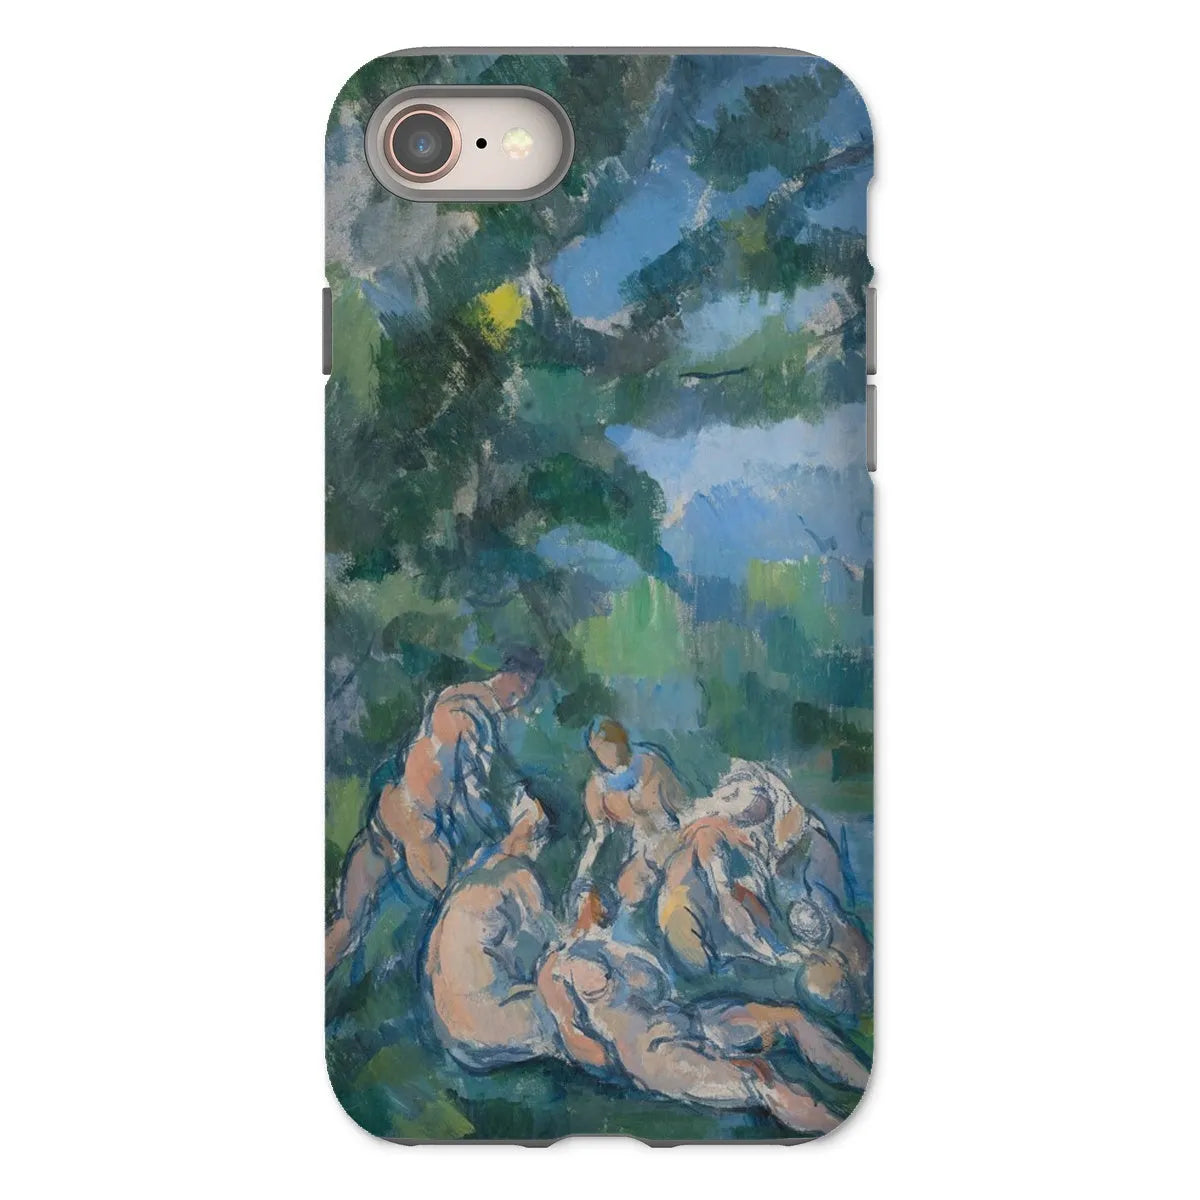 The Bathers - Post-impressionism Phone Case - Paul Cezanne - Iphone 8 / Matte - Mobile Phone Cases - Aesthetic Art